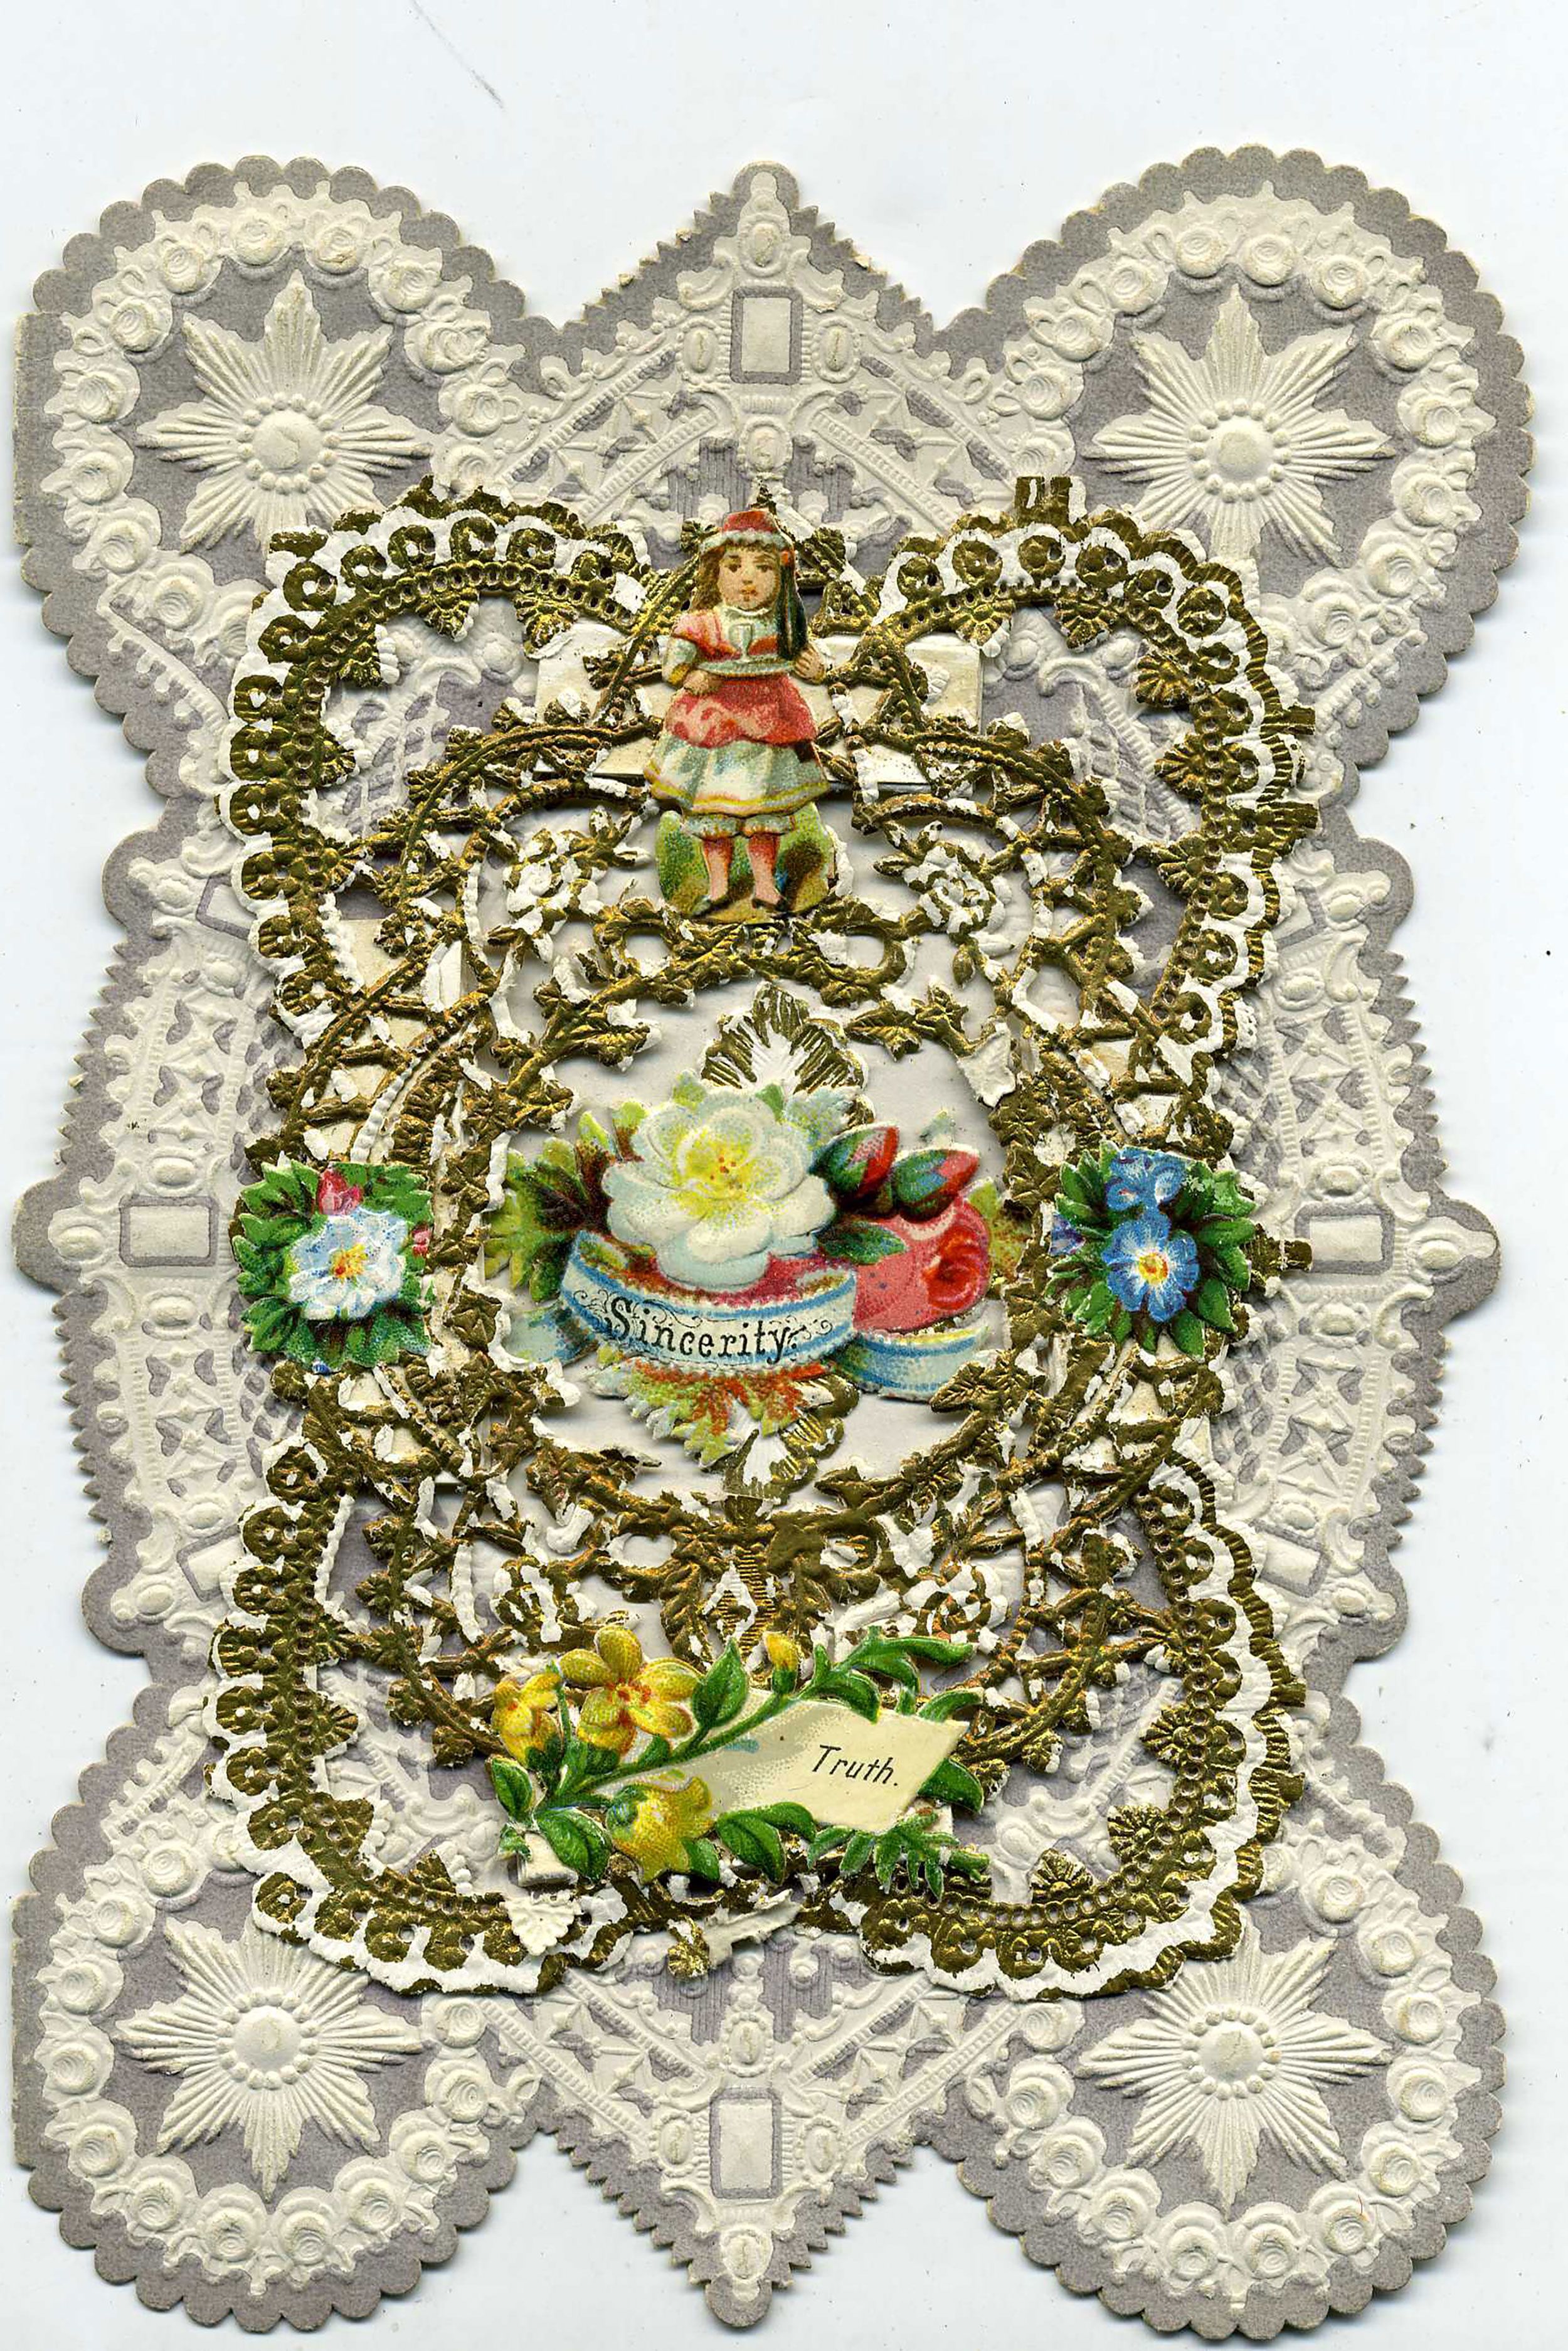 Ornate lace designs were a trademark of Esther Howland's valentines.